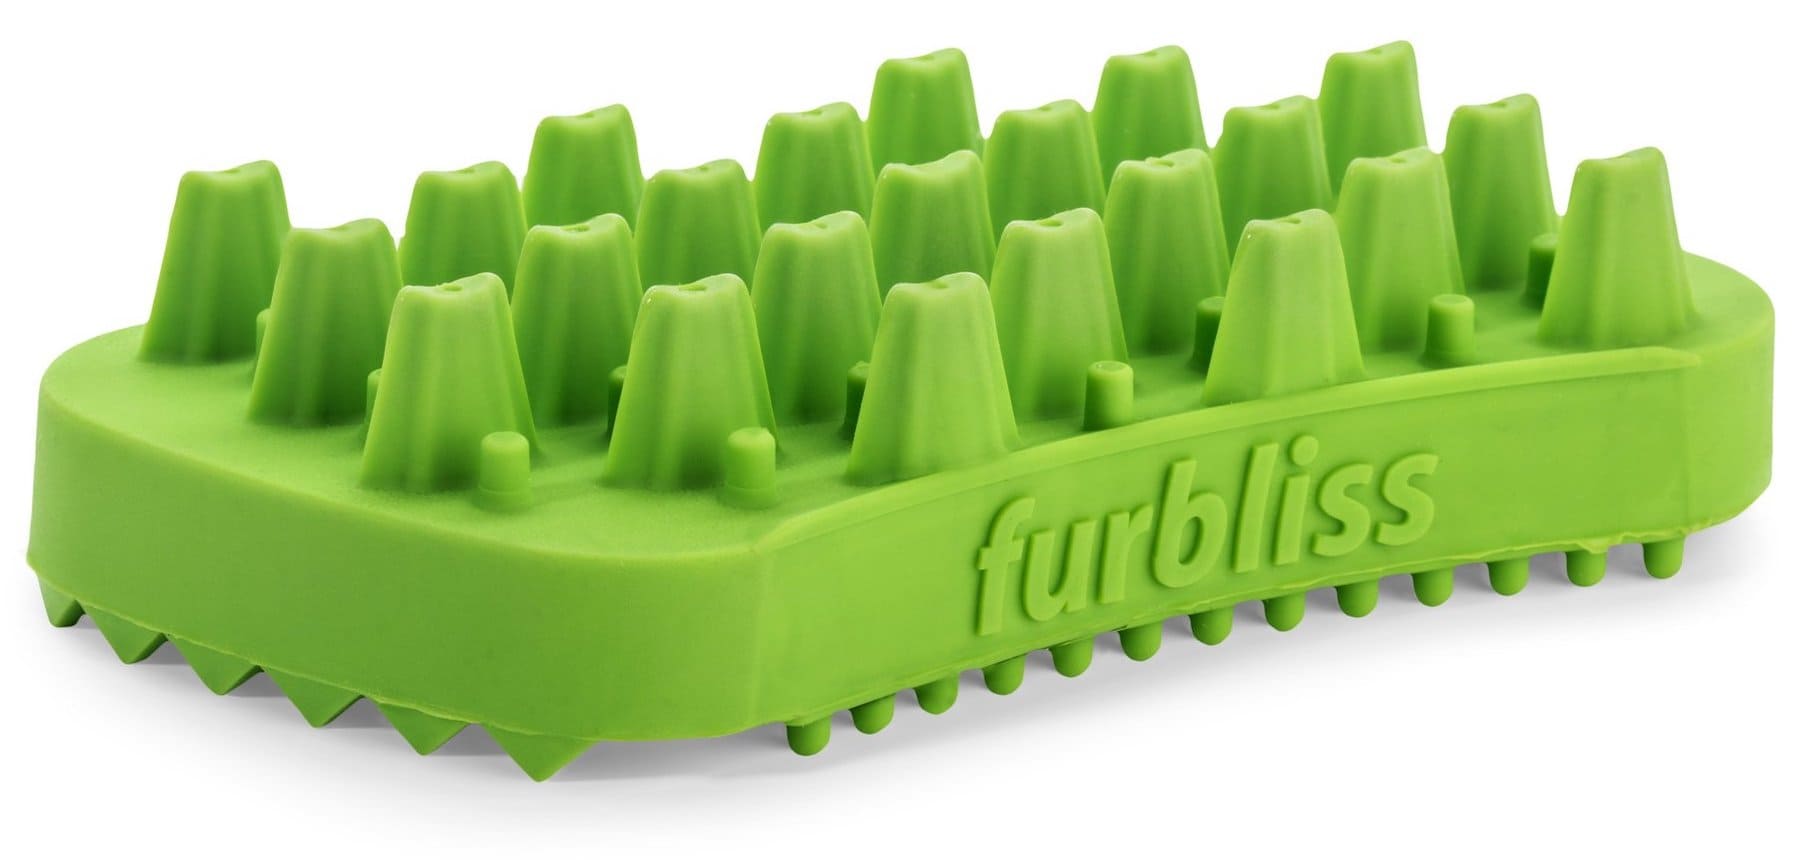 Furbliss Multi-Functional Brush for Pets 1 count with long hair (Green) 2